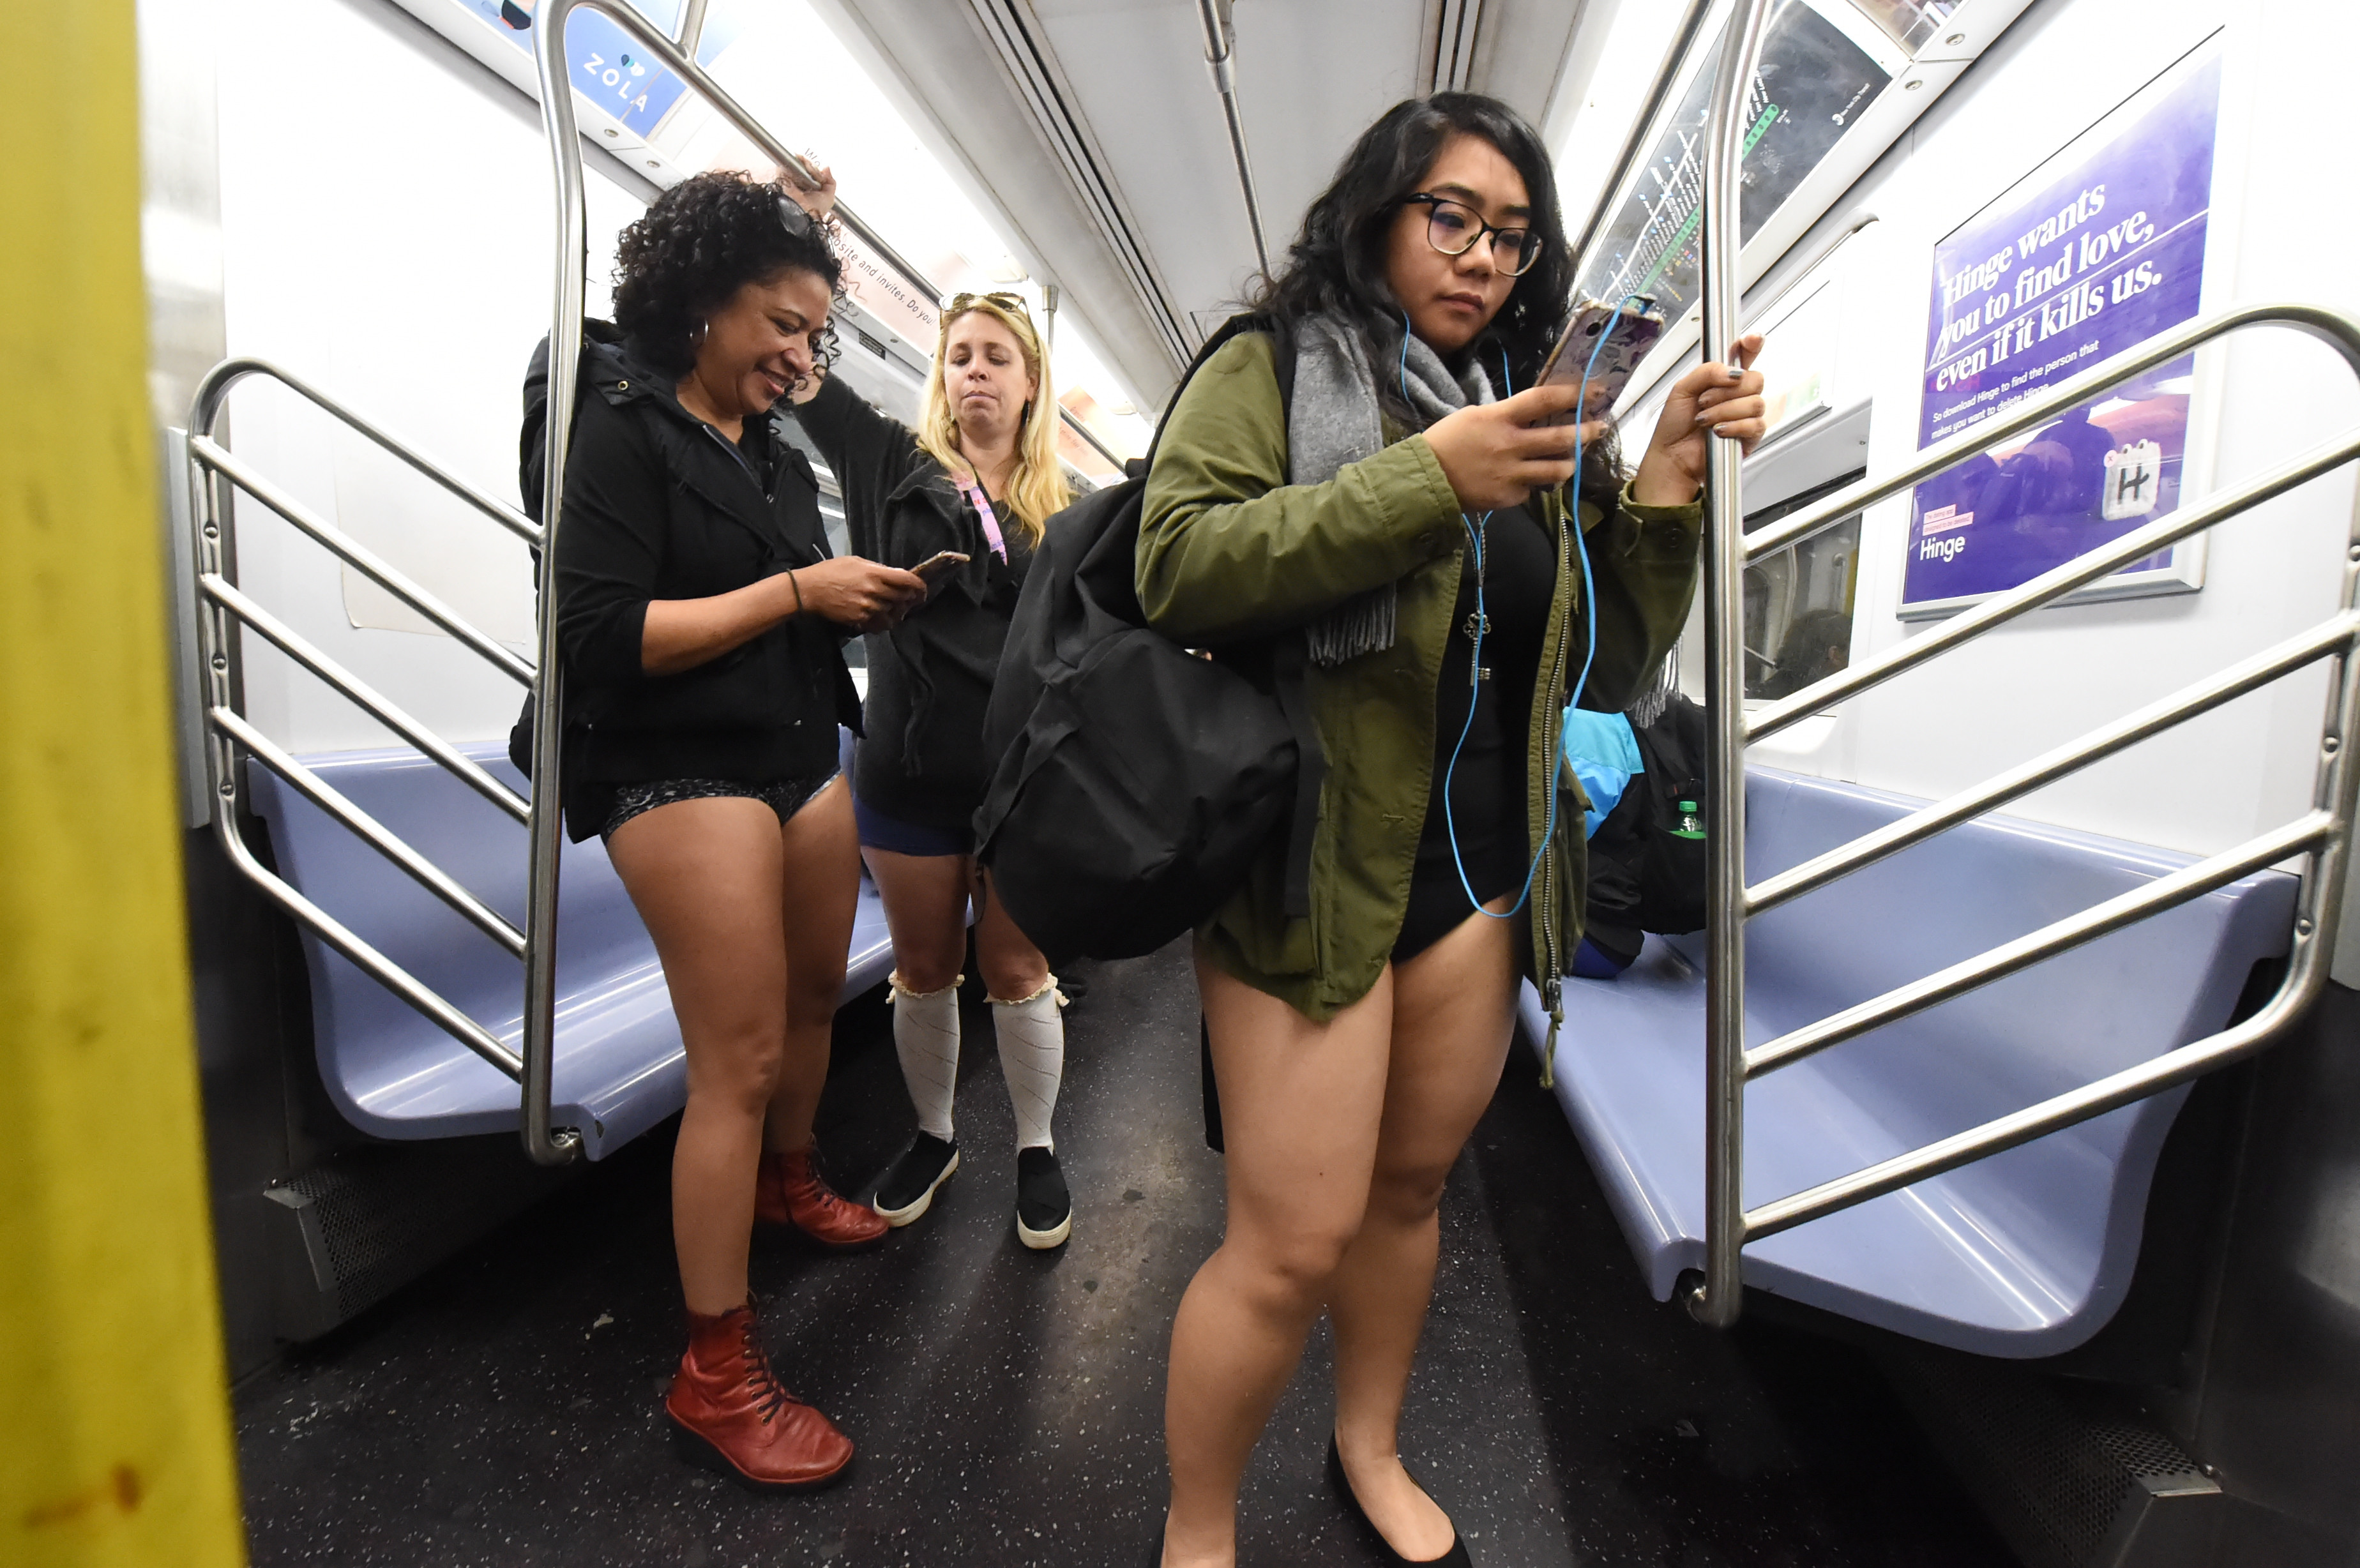 No Pants Subway Ride Day, The Independent